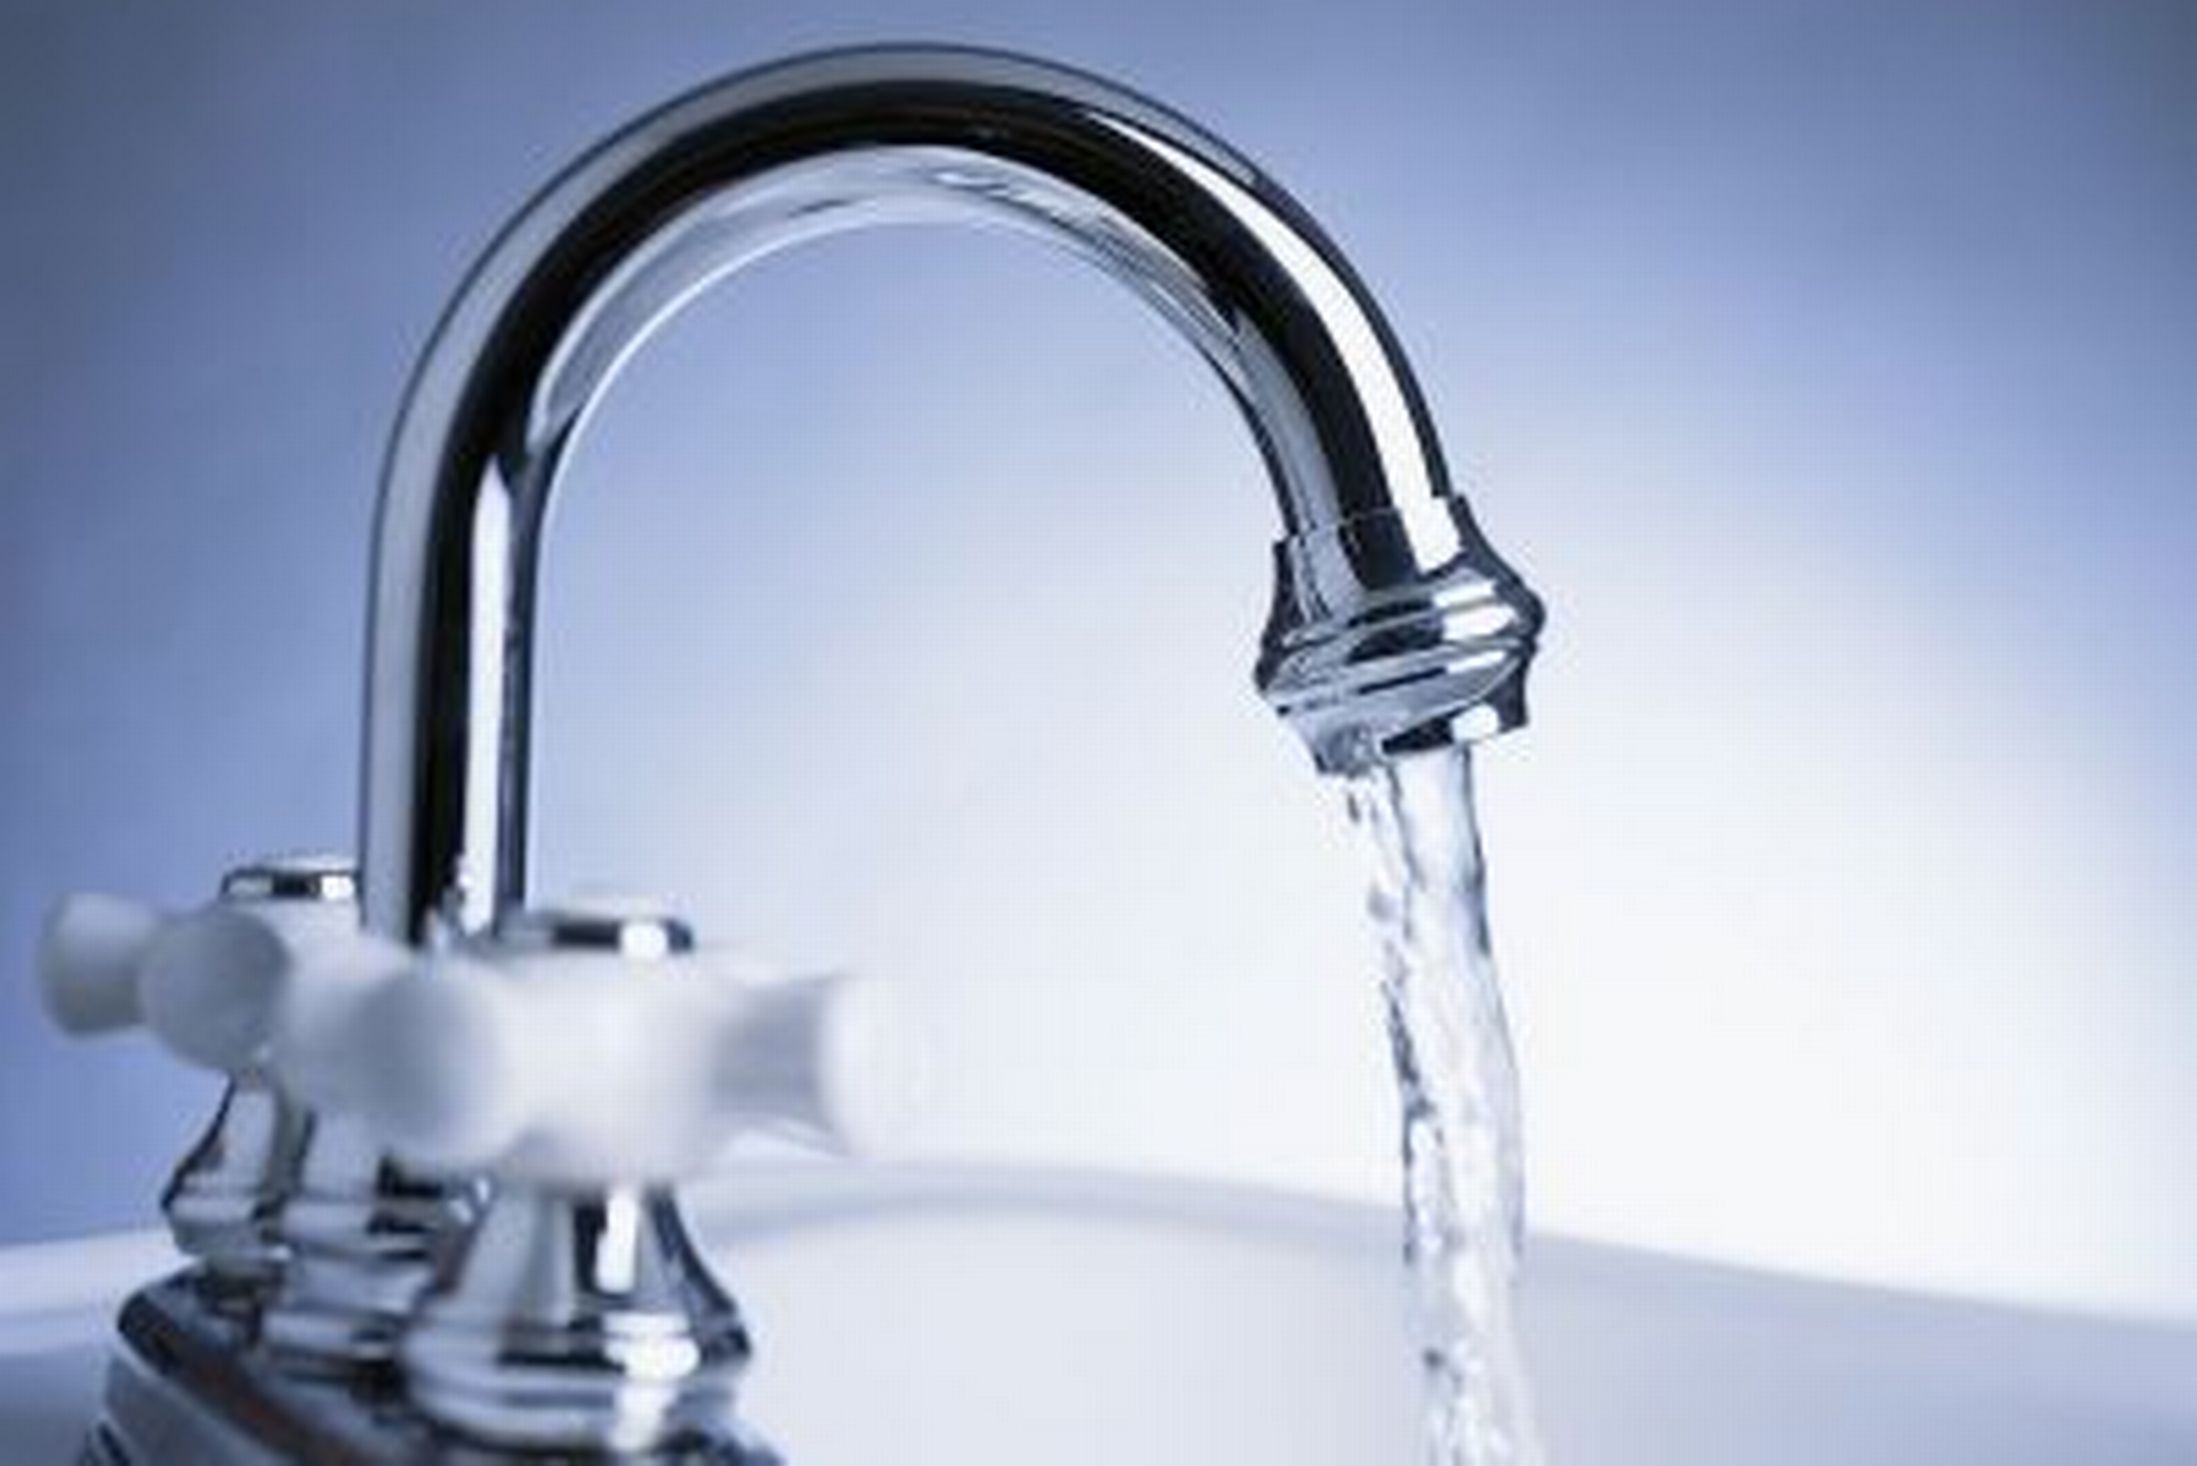 Boil Order For Clinton City Water Supply Continues, Syracuse Order ...